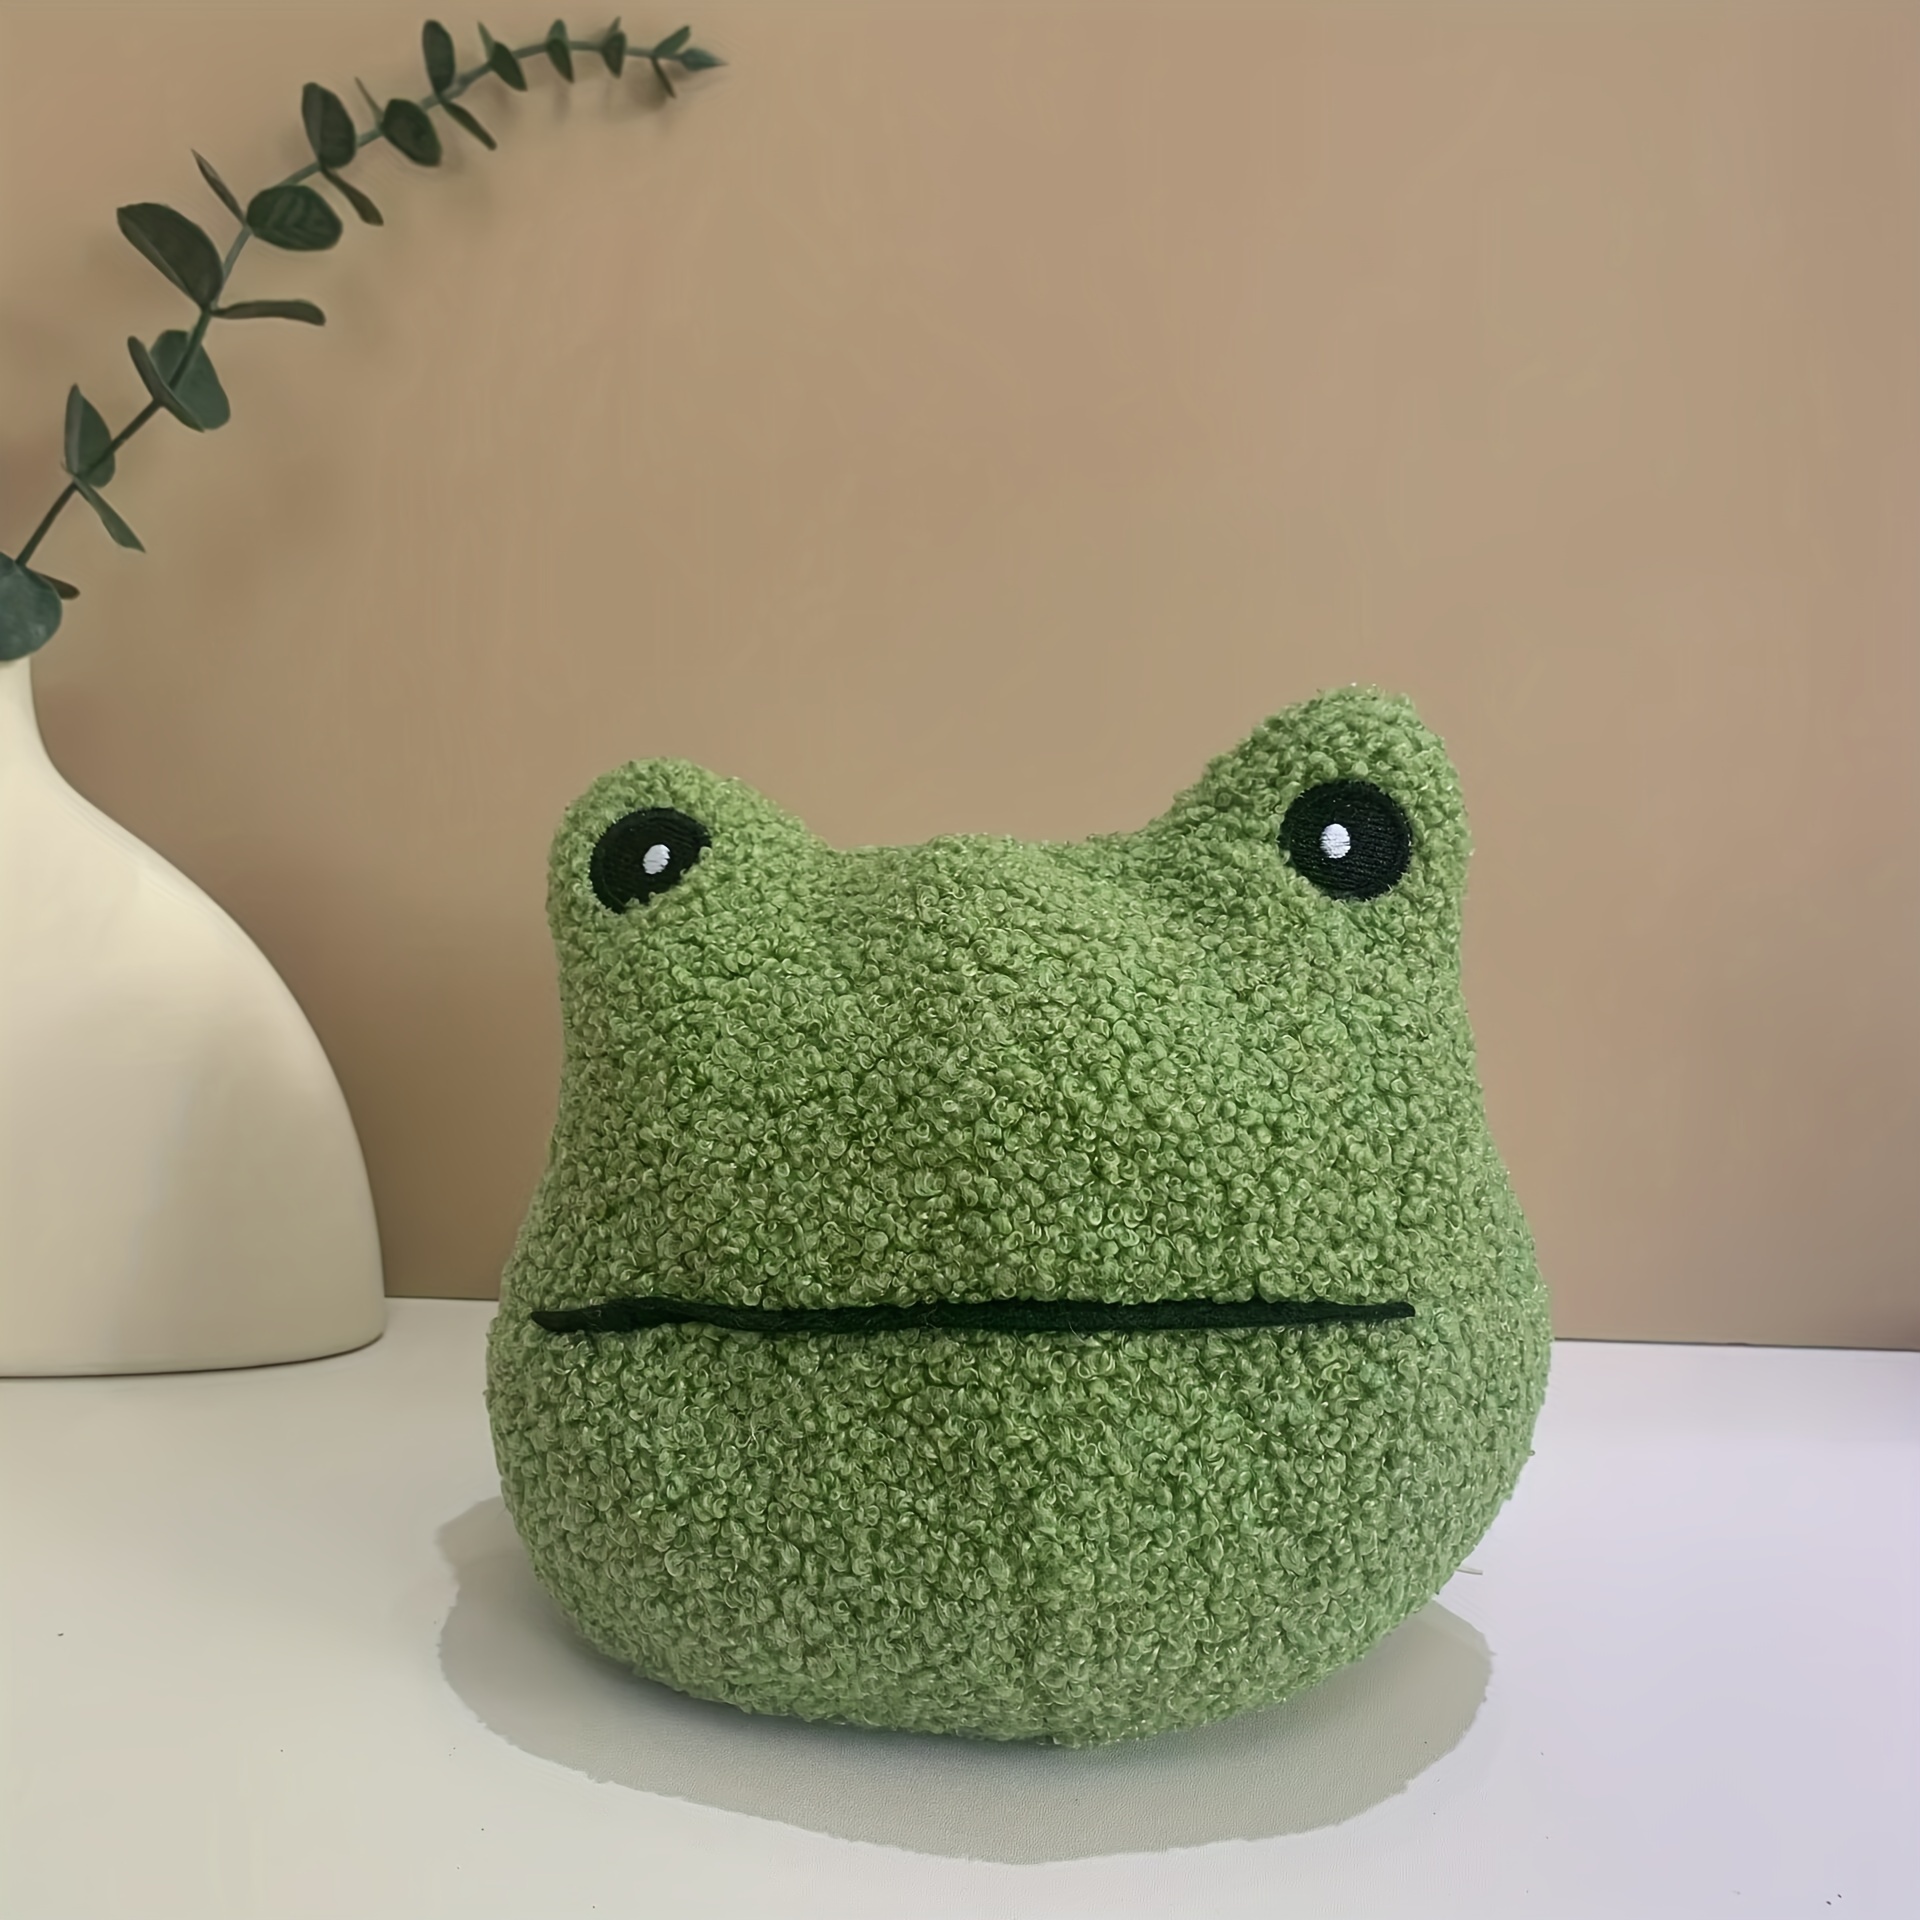 20cm / 7.87in Cute Frog Plush Bag -the Perfect Decorated Crossbody Bag - For Birthday And Christmas Gifts.Creative Kawaii Cartoon Plush Day Bag